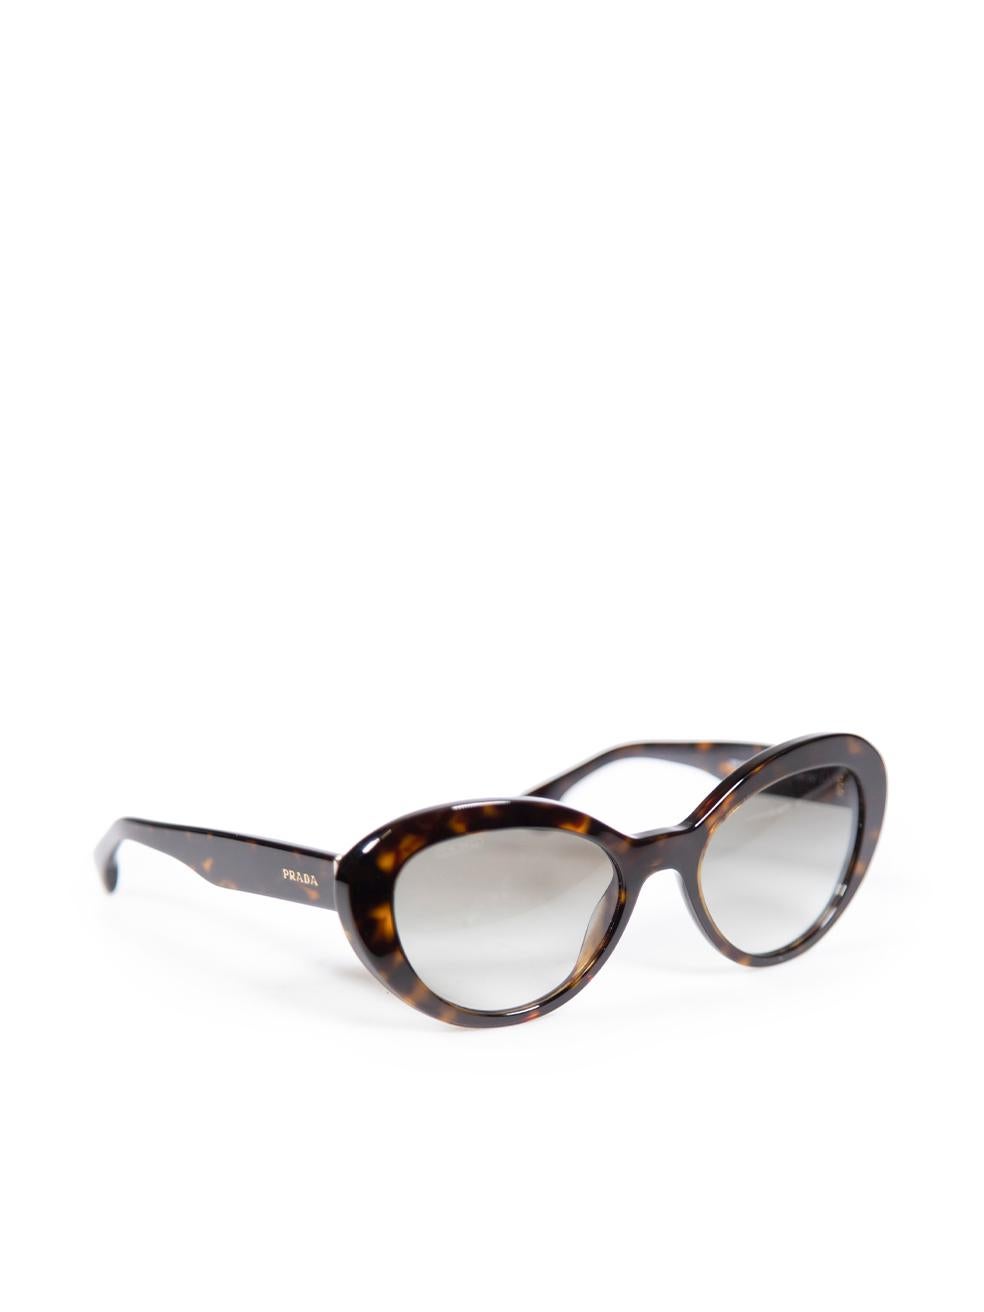 CONDITION is Very good. Minimal wear to sunglasses is evident. Minimal wear to the frame with very light scratches on this used Prada designer resale item. These sunglasses come with original case and box.
 
 
 
 Details
 
 
 SPR15Q model
 
 Brown
